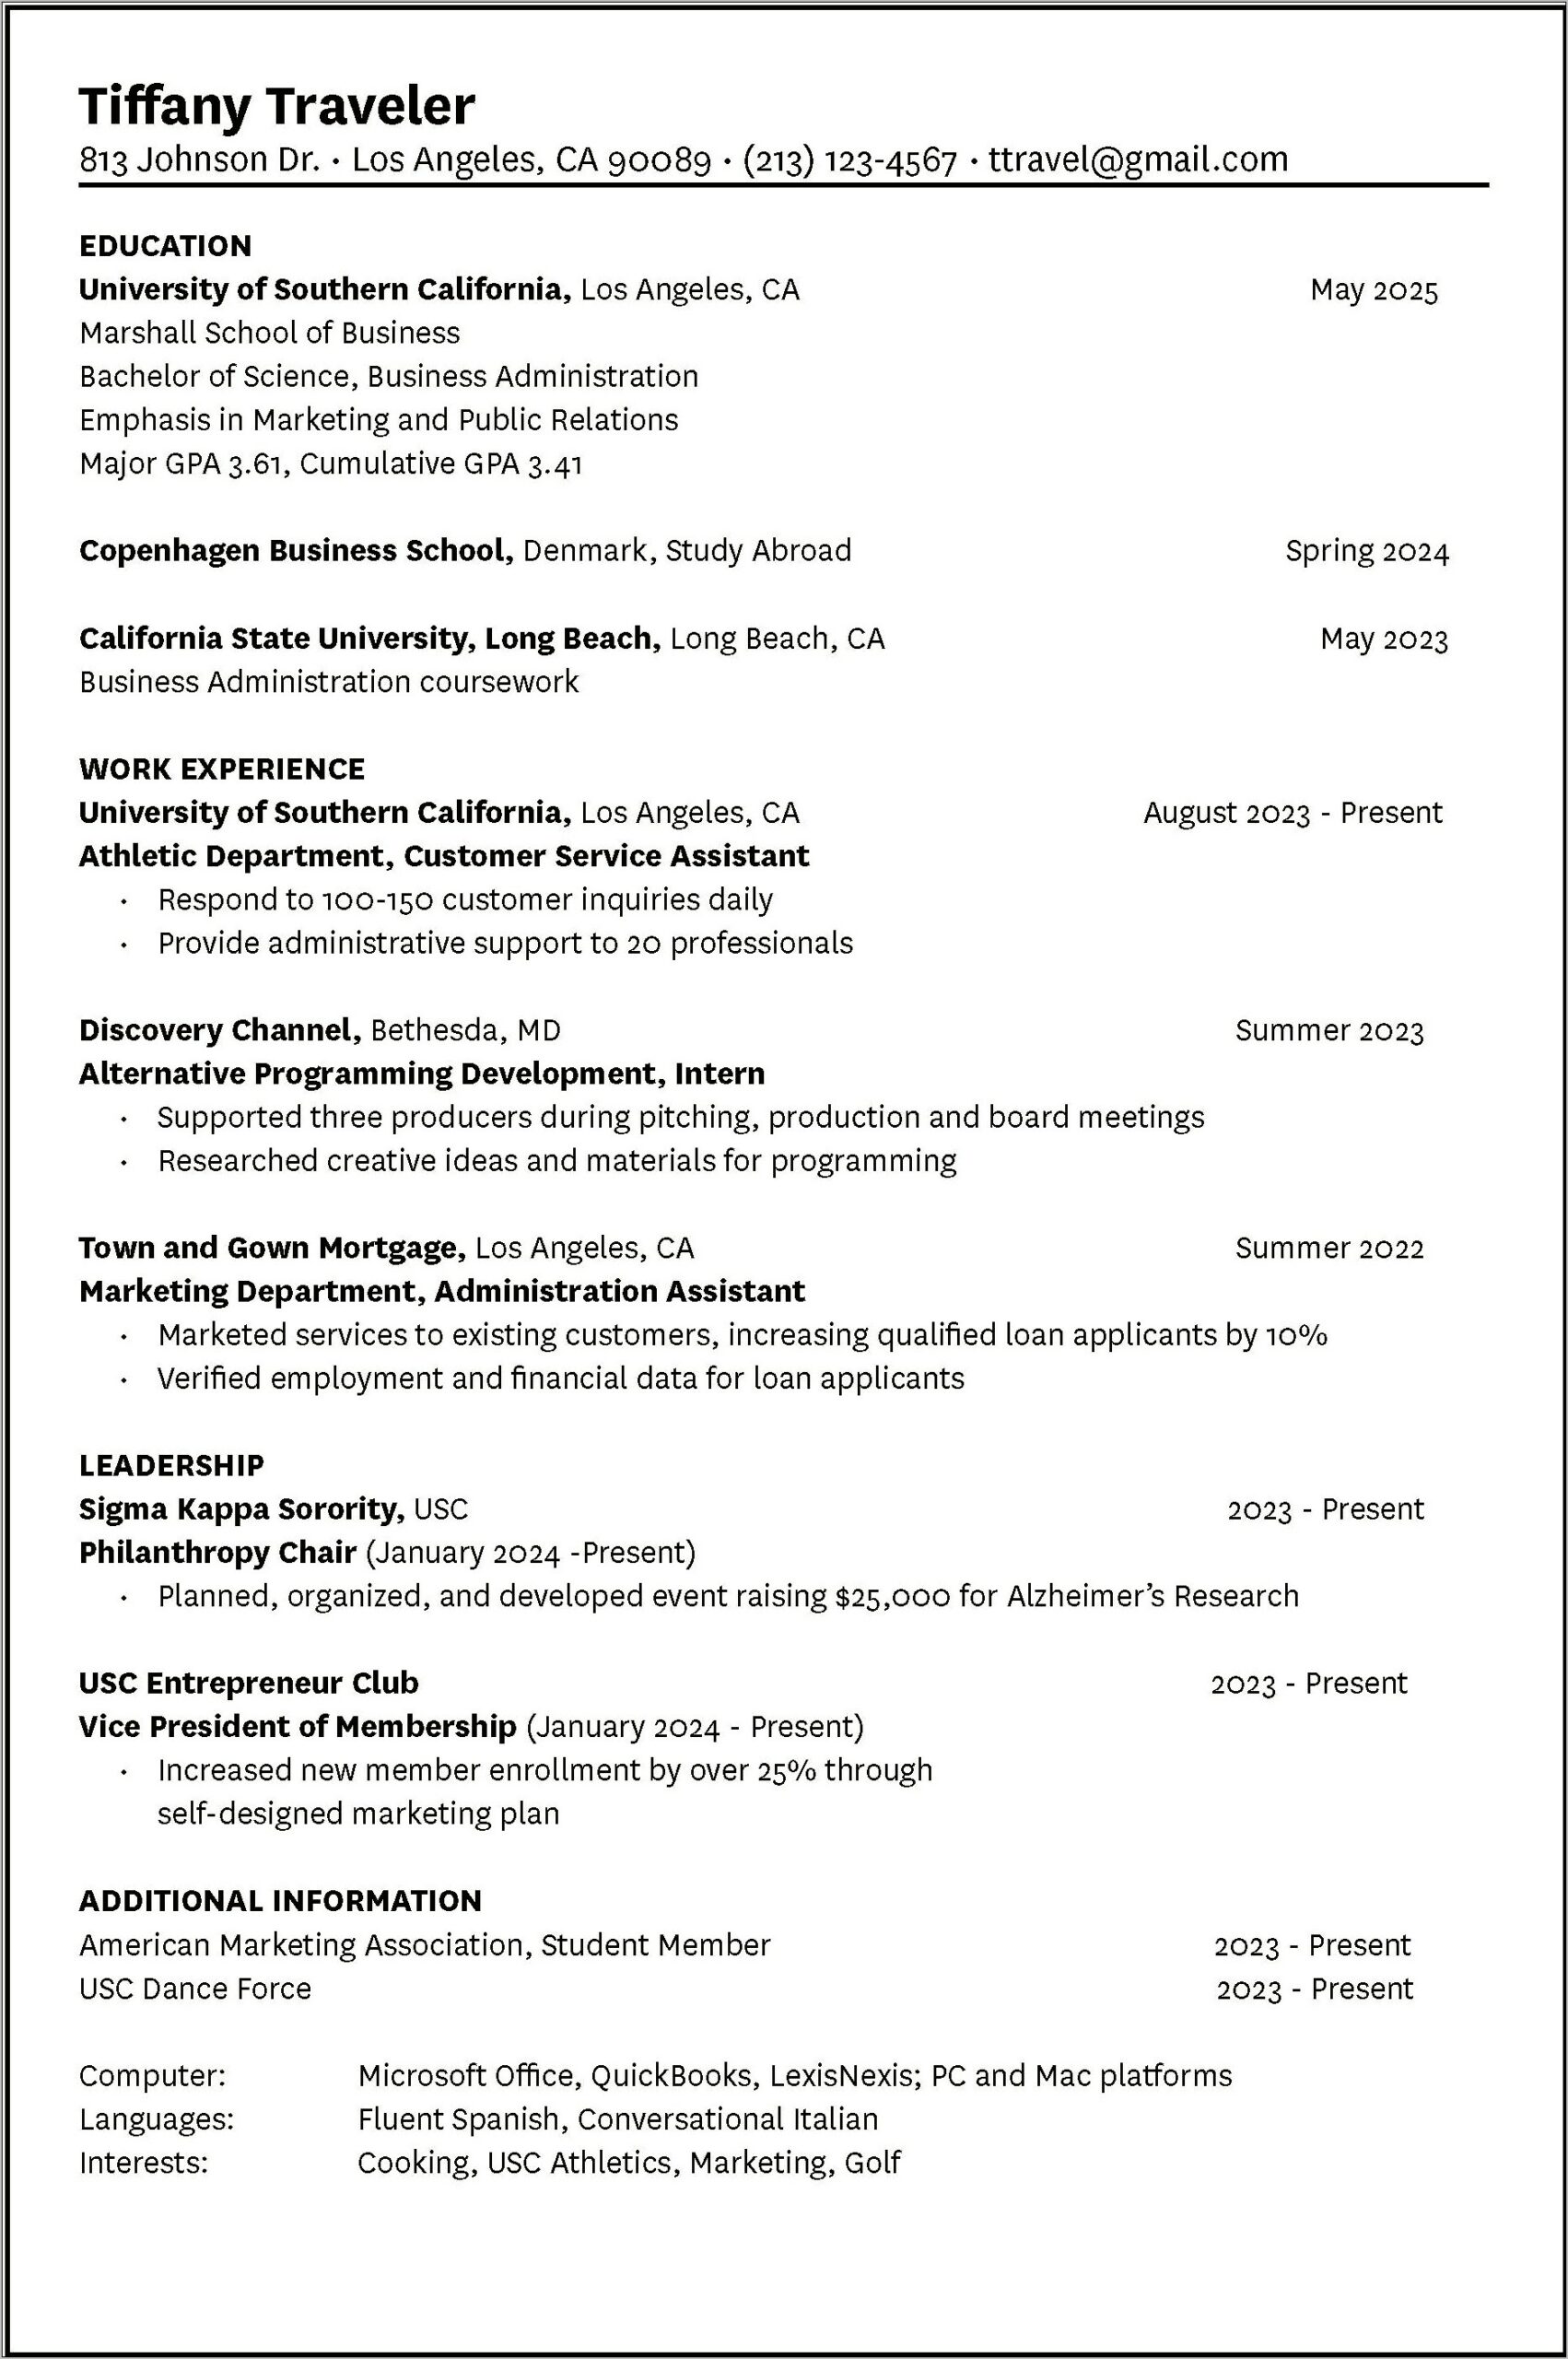 Letter With Resume To Explain Alternative Path